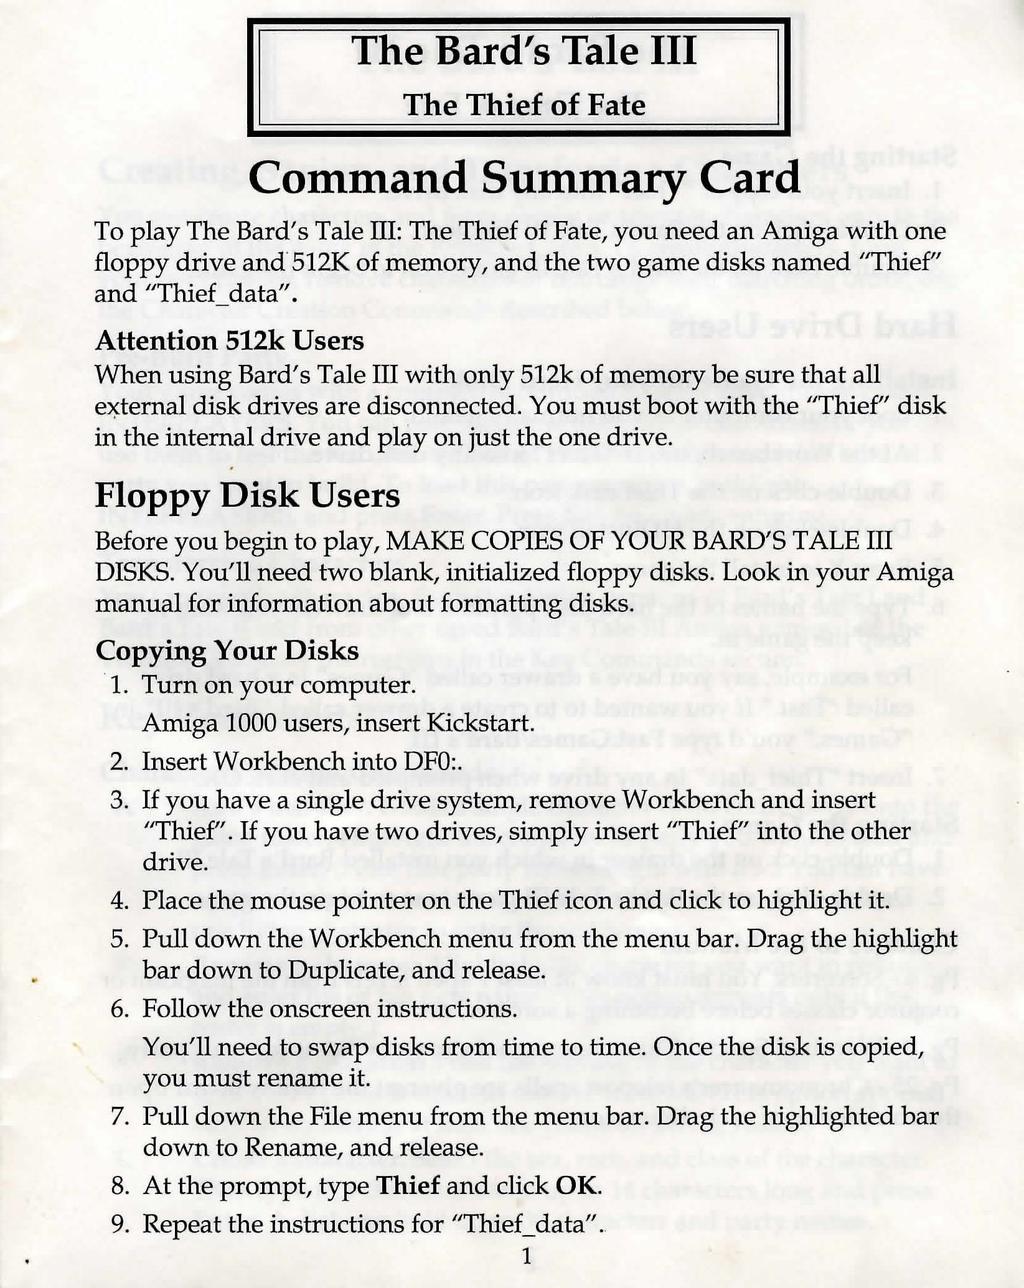 Command Summary Card To play :, you need an Amiga with one floppy drive and 512K of memory, and the two game disks named "Thief" and "Thief_ data".